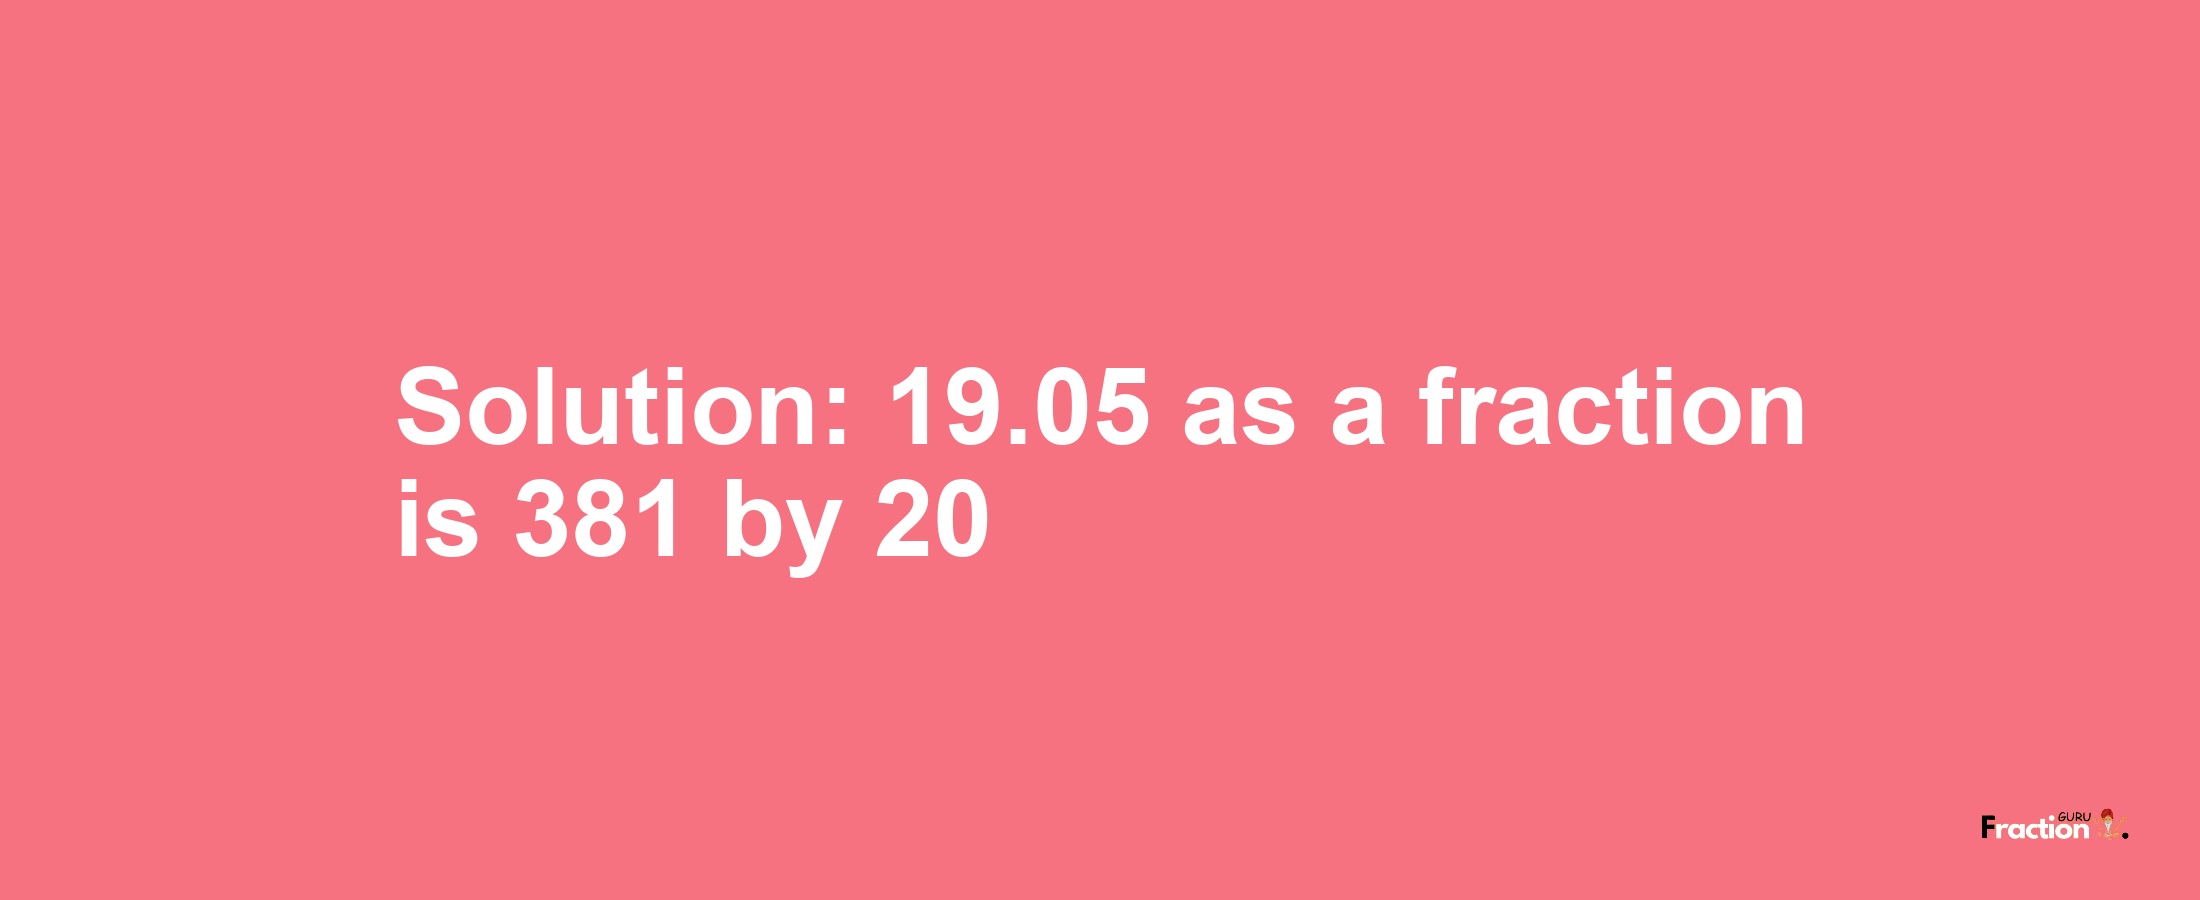 Solution:19.05 as a fraction is 381/20